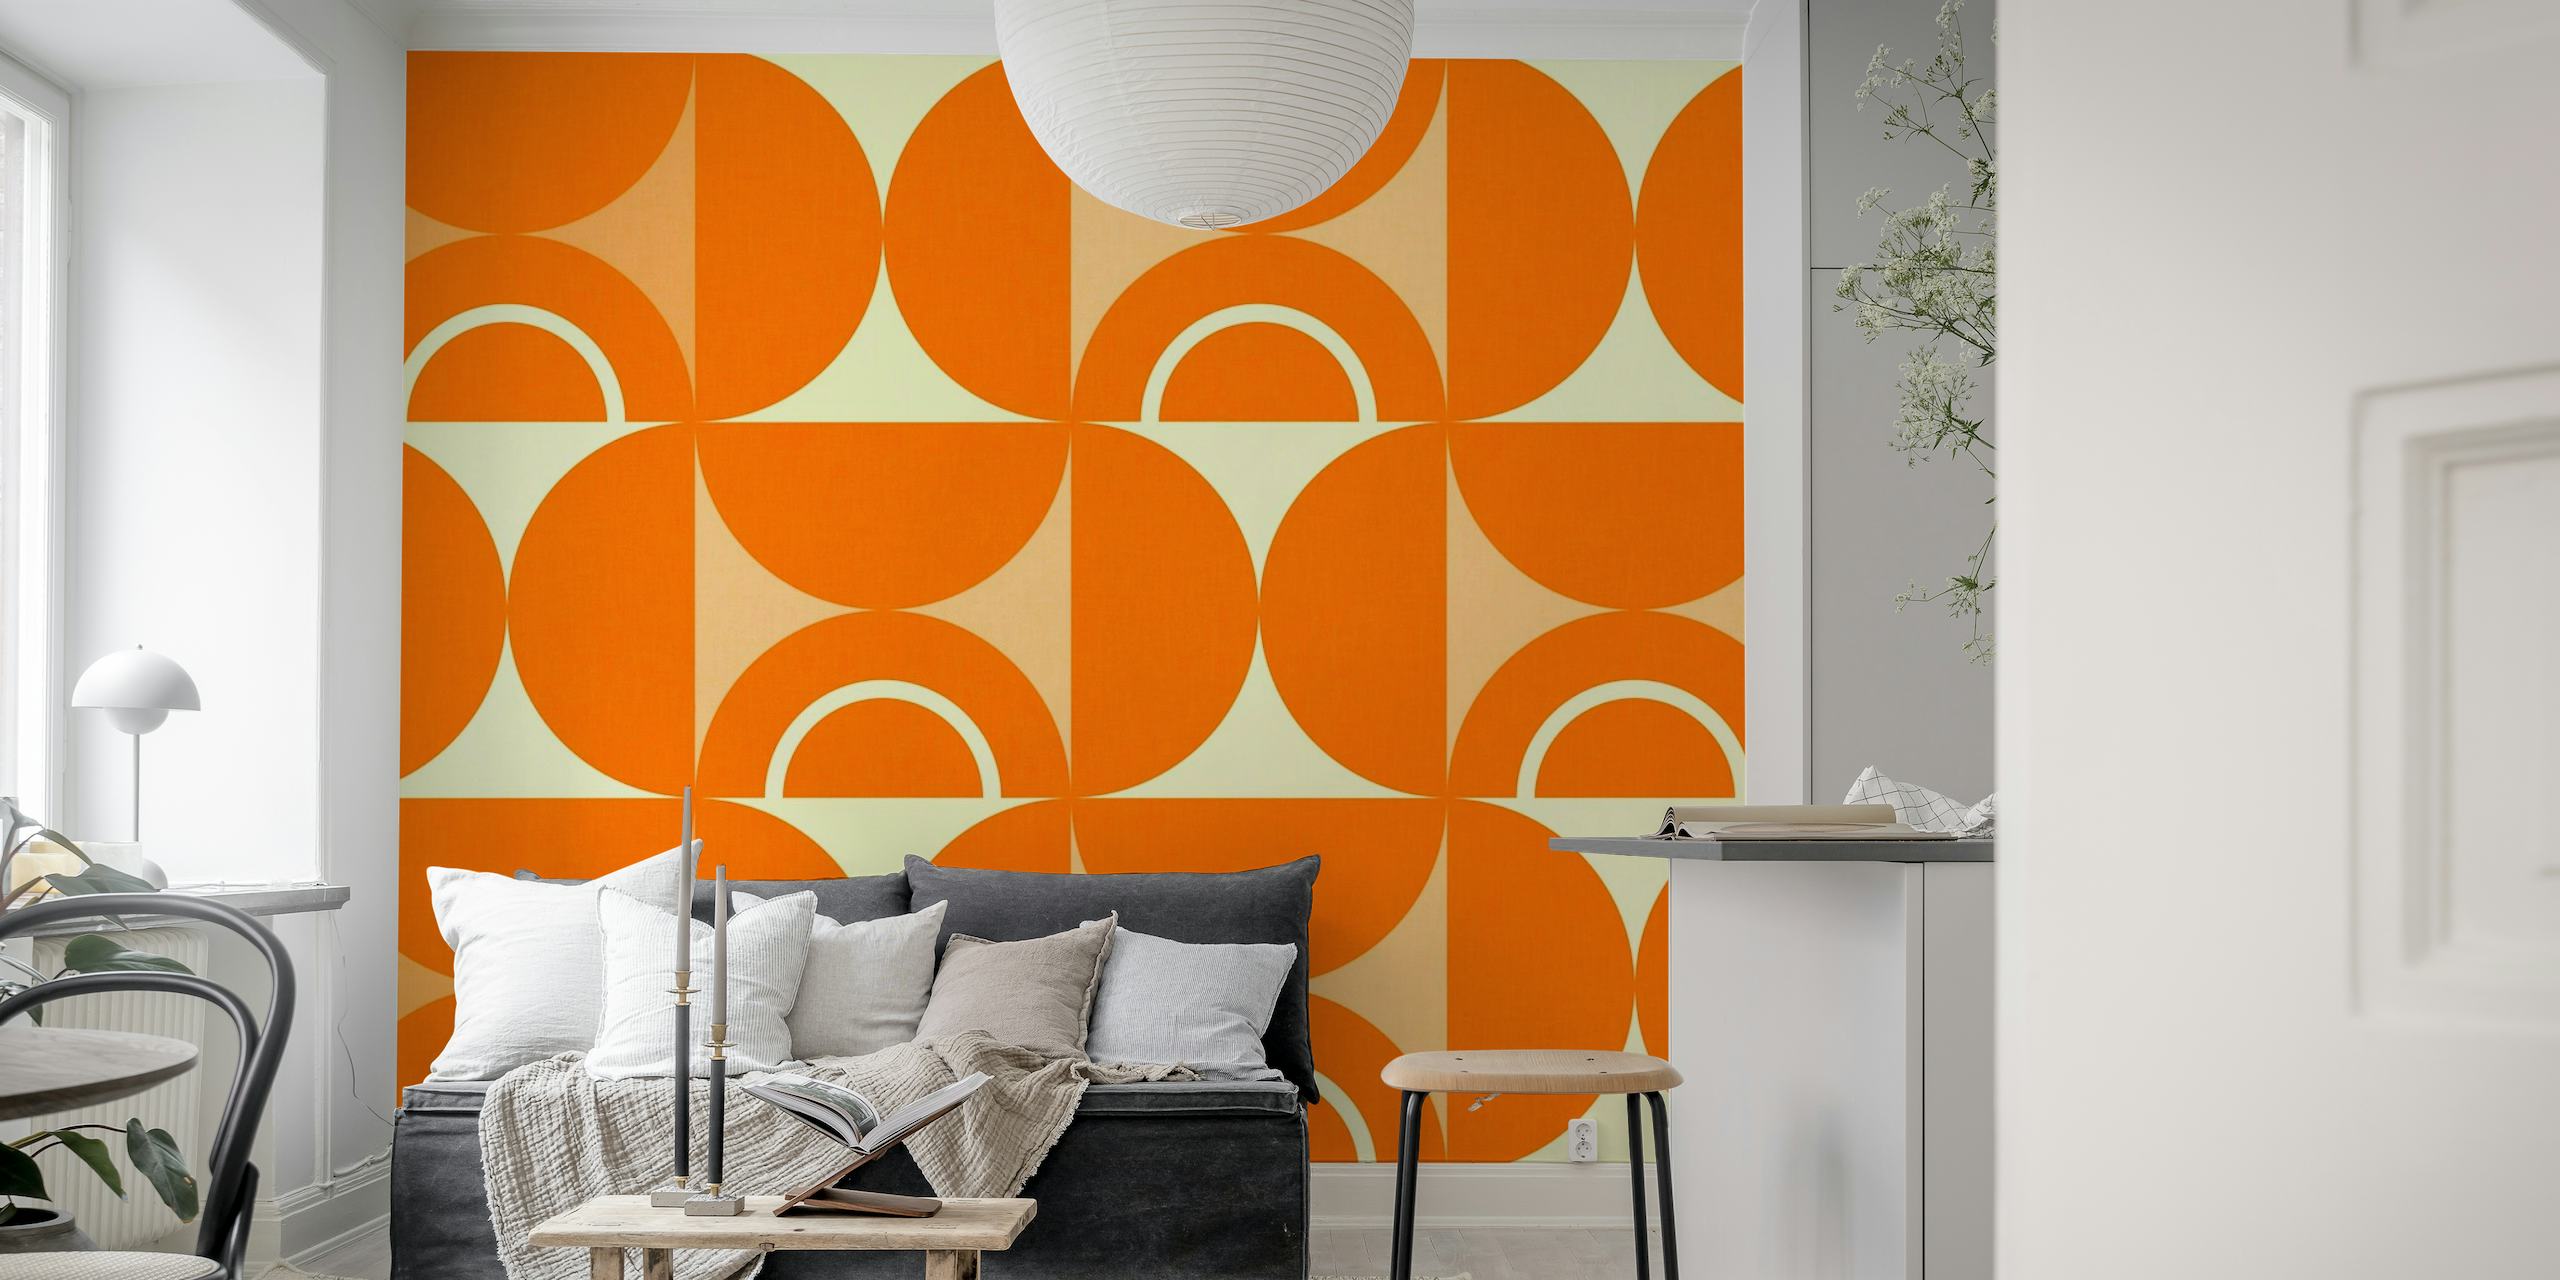 Mid-century modern geometric pattern in orange and white for wall mural